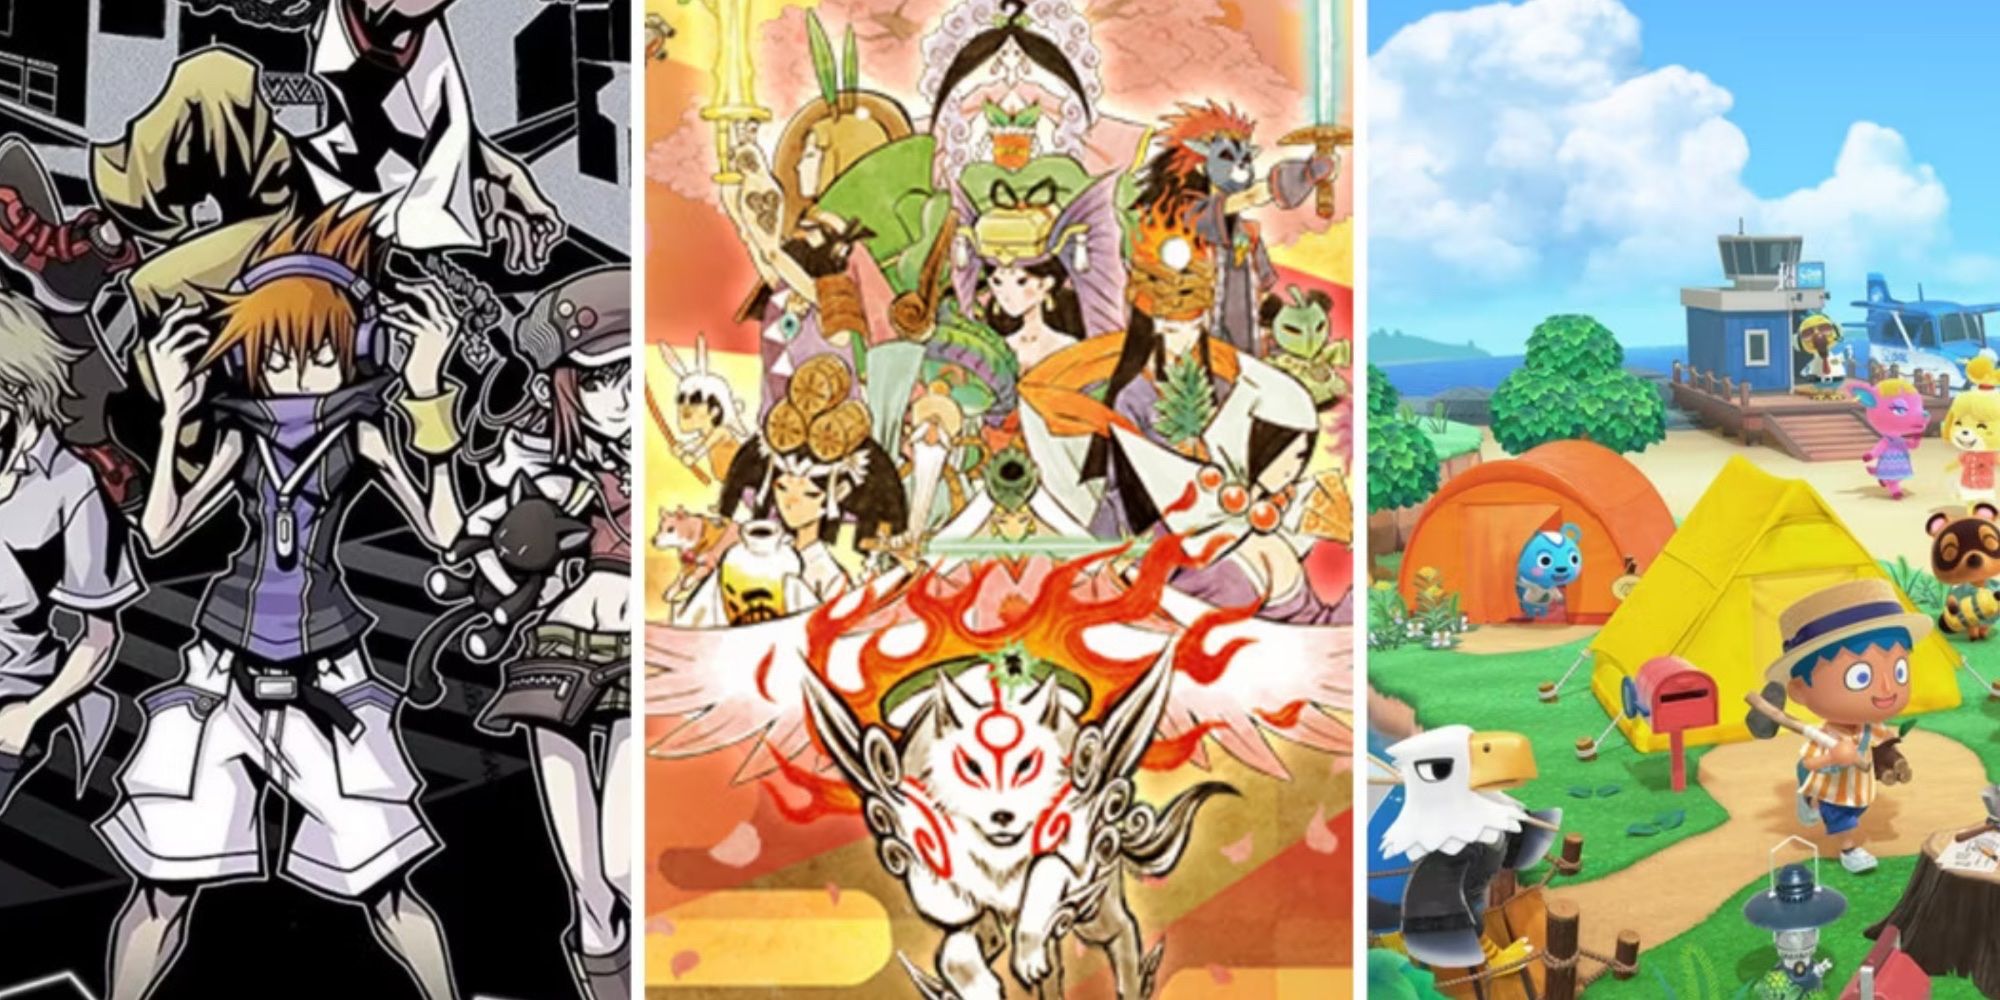 Split images of The World Ends With You- Okami- and Animal Crossing New Horizons